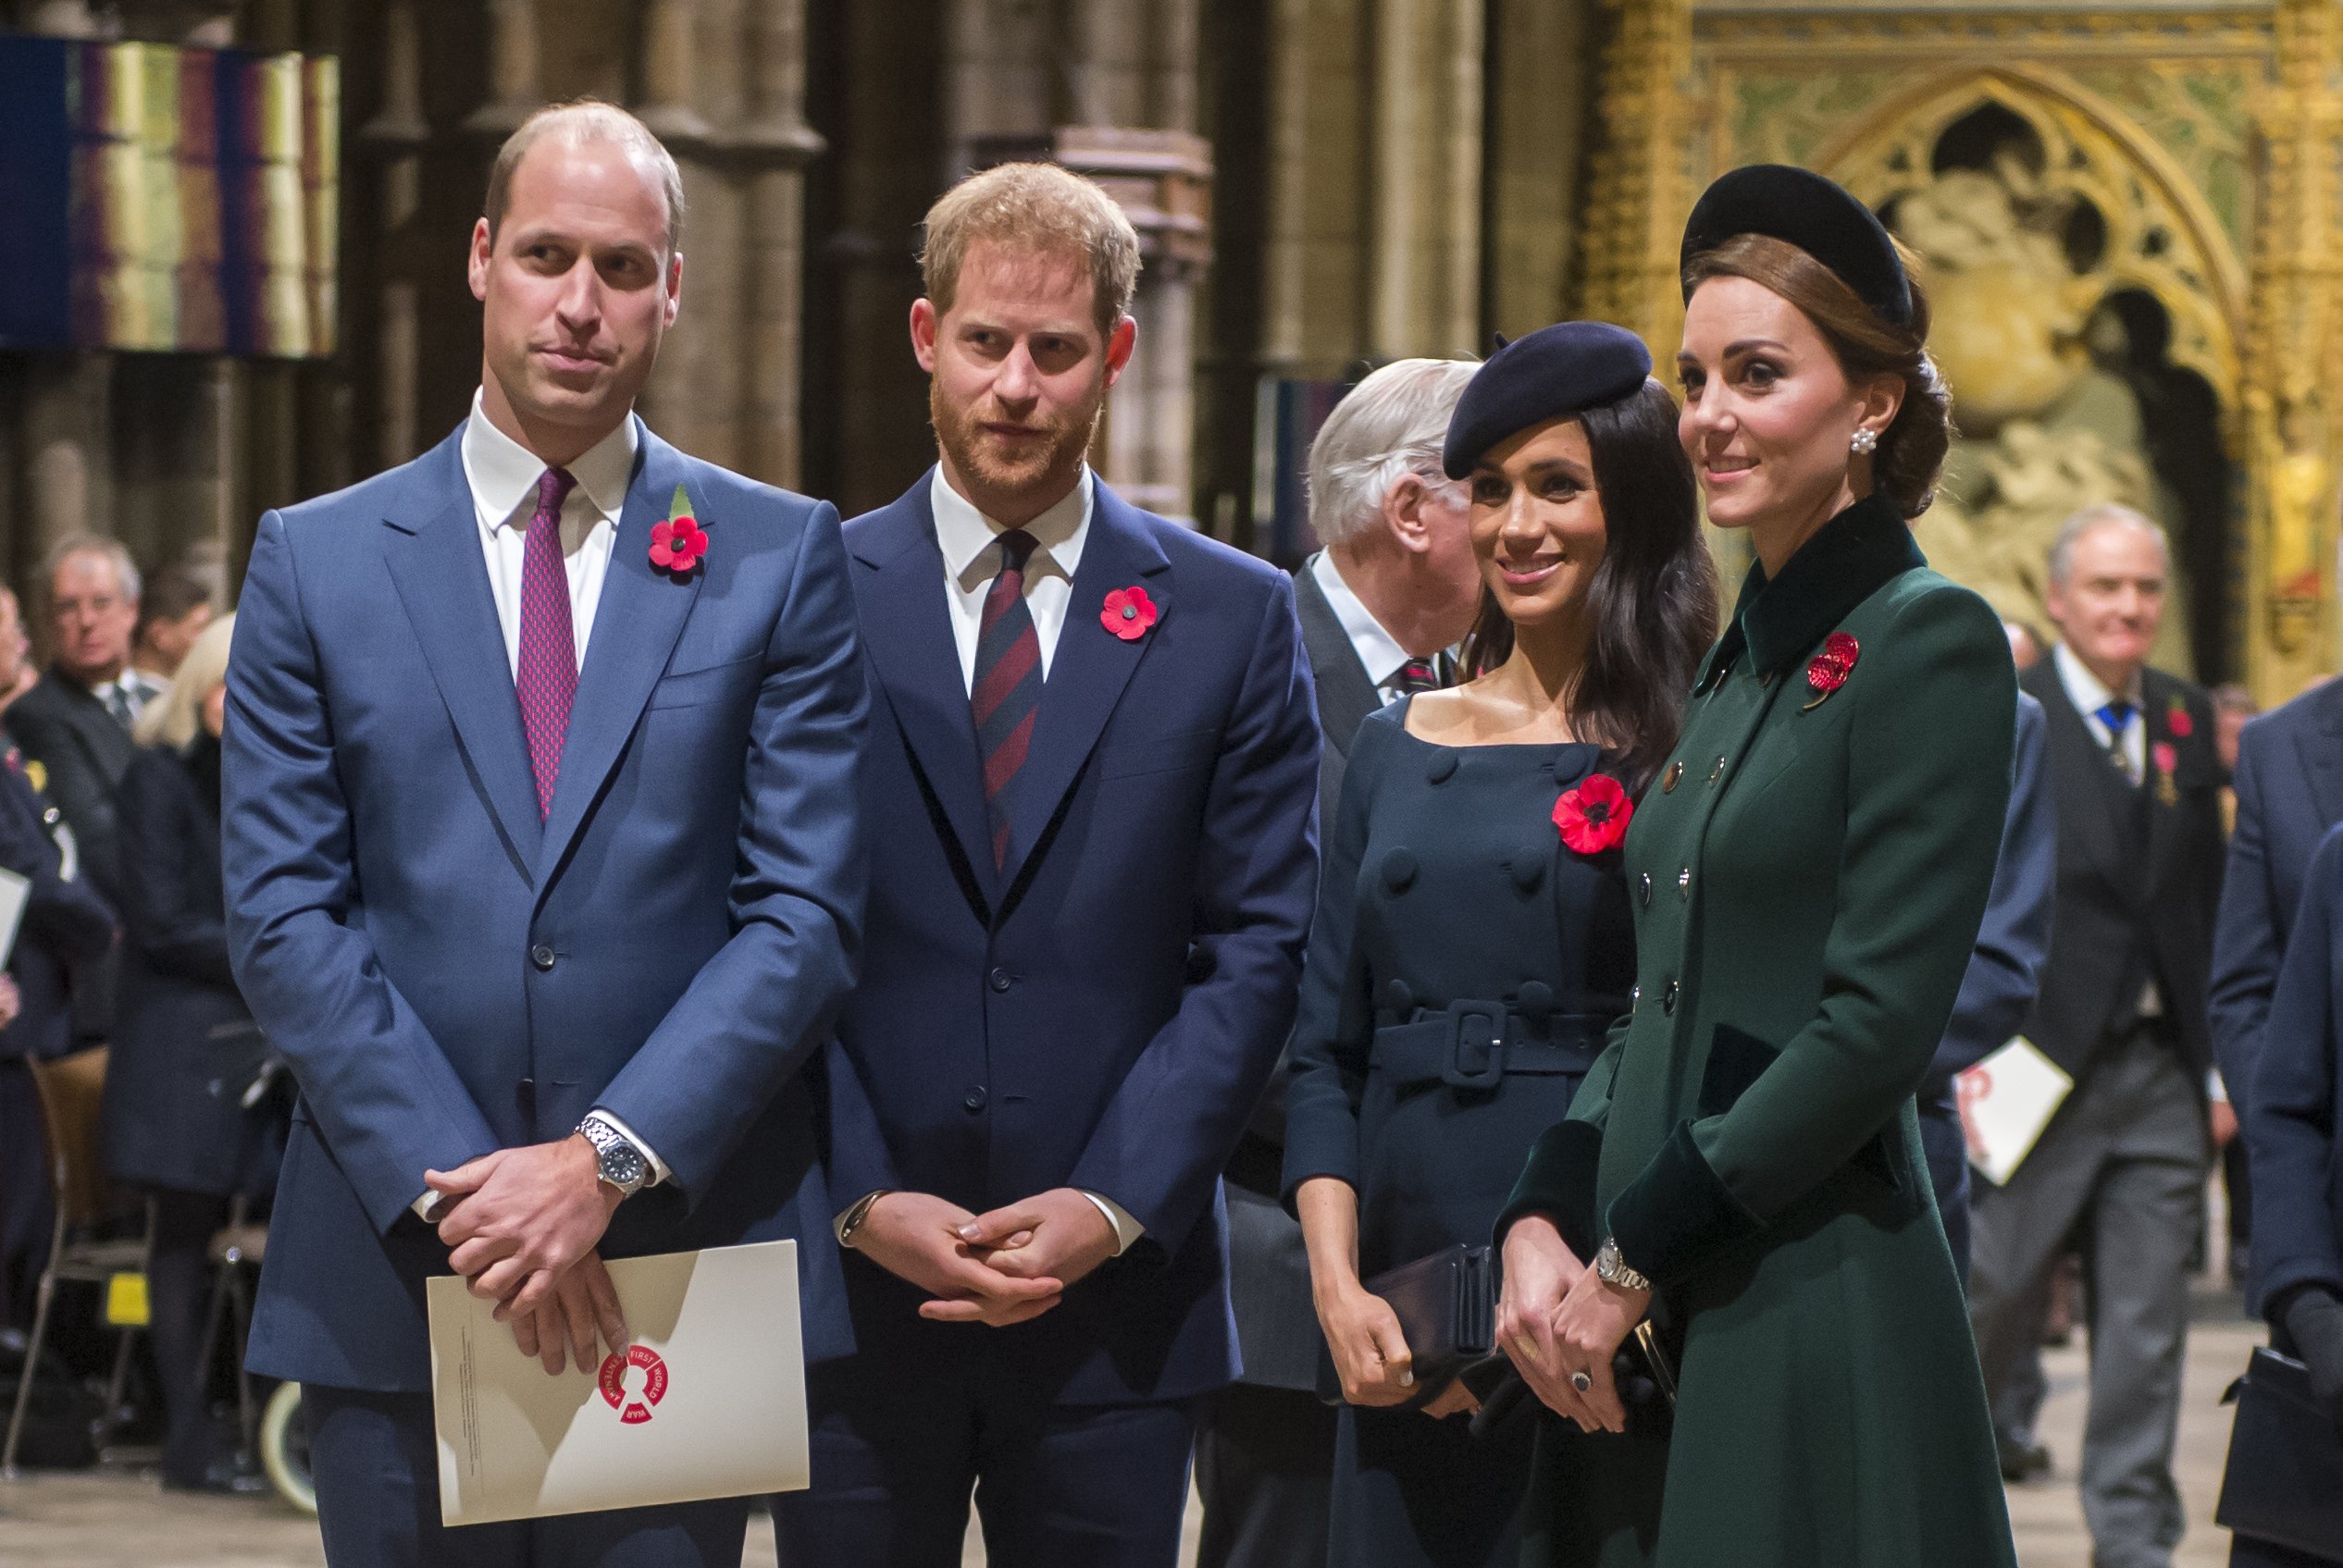 Prince William, Duke of Cambridge and Catherine, Duchess of Cambridge, Prince Harry, Duke of Sussex and Meghan, Duchess of Sussex attend a service marking the centenary of WW1 armistice at Westminster Abbey on November 11, 2018 in London, England | Source: Getty Images 